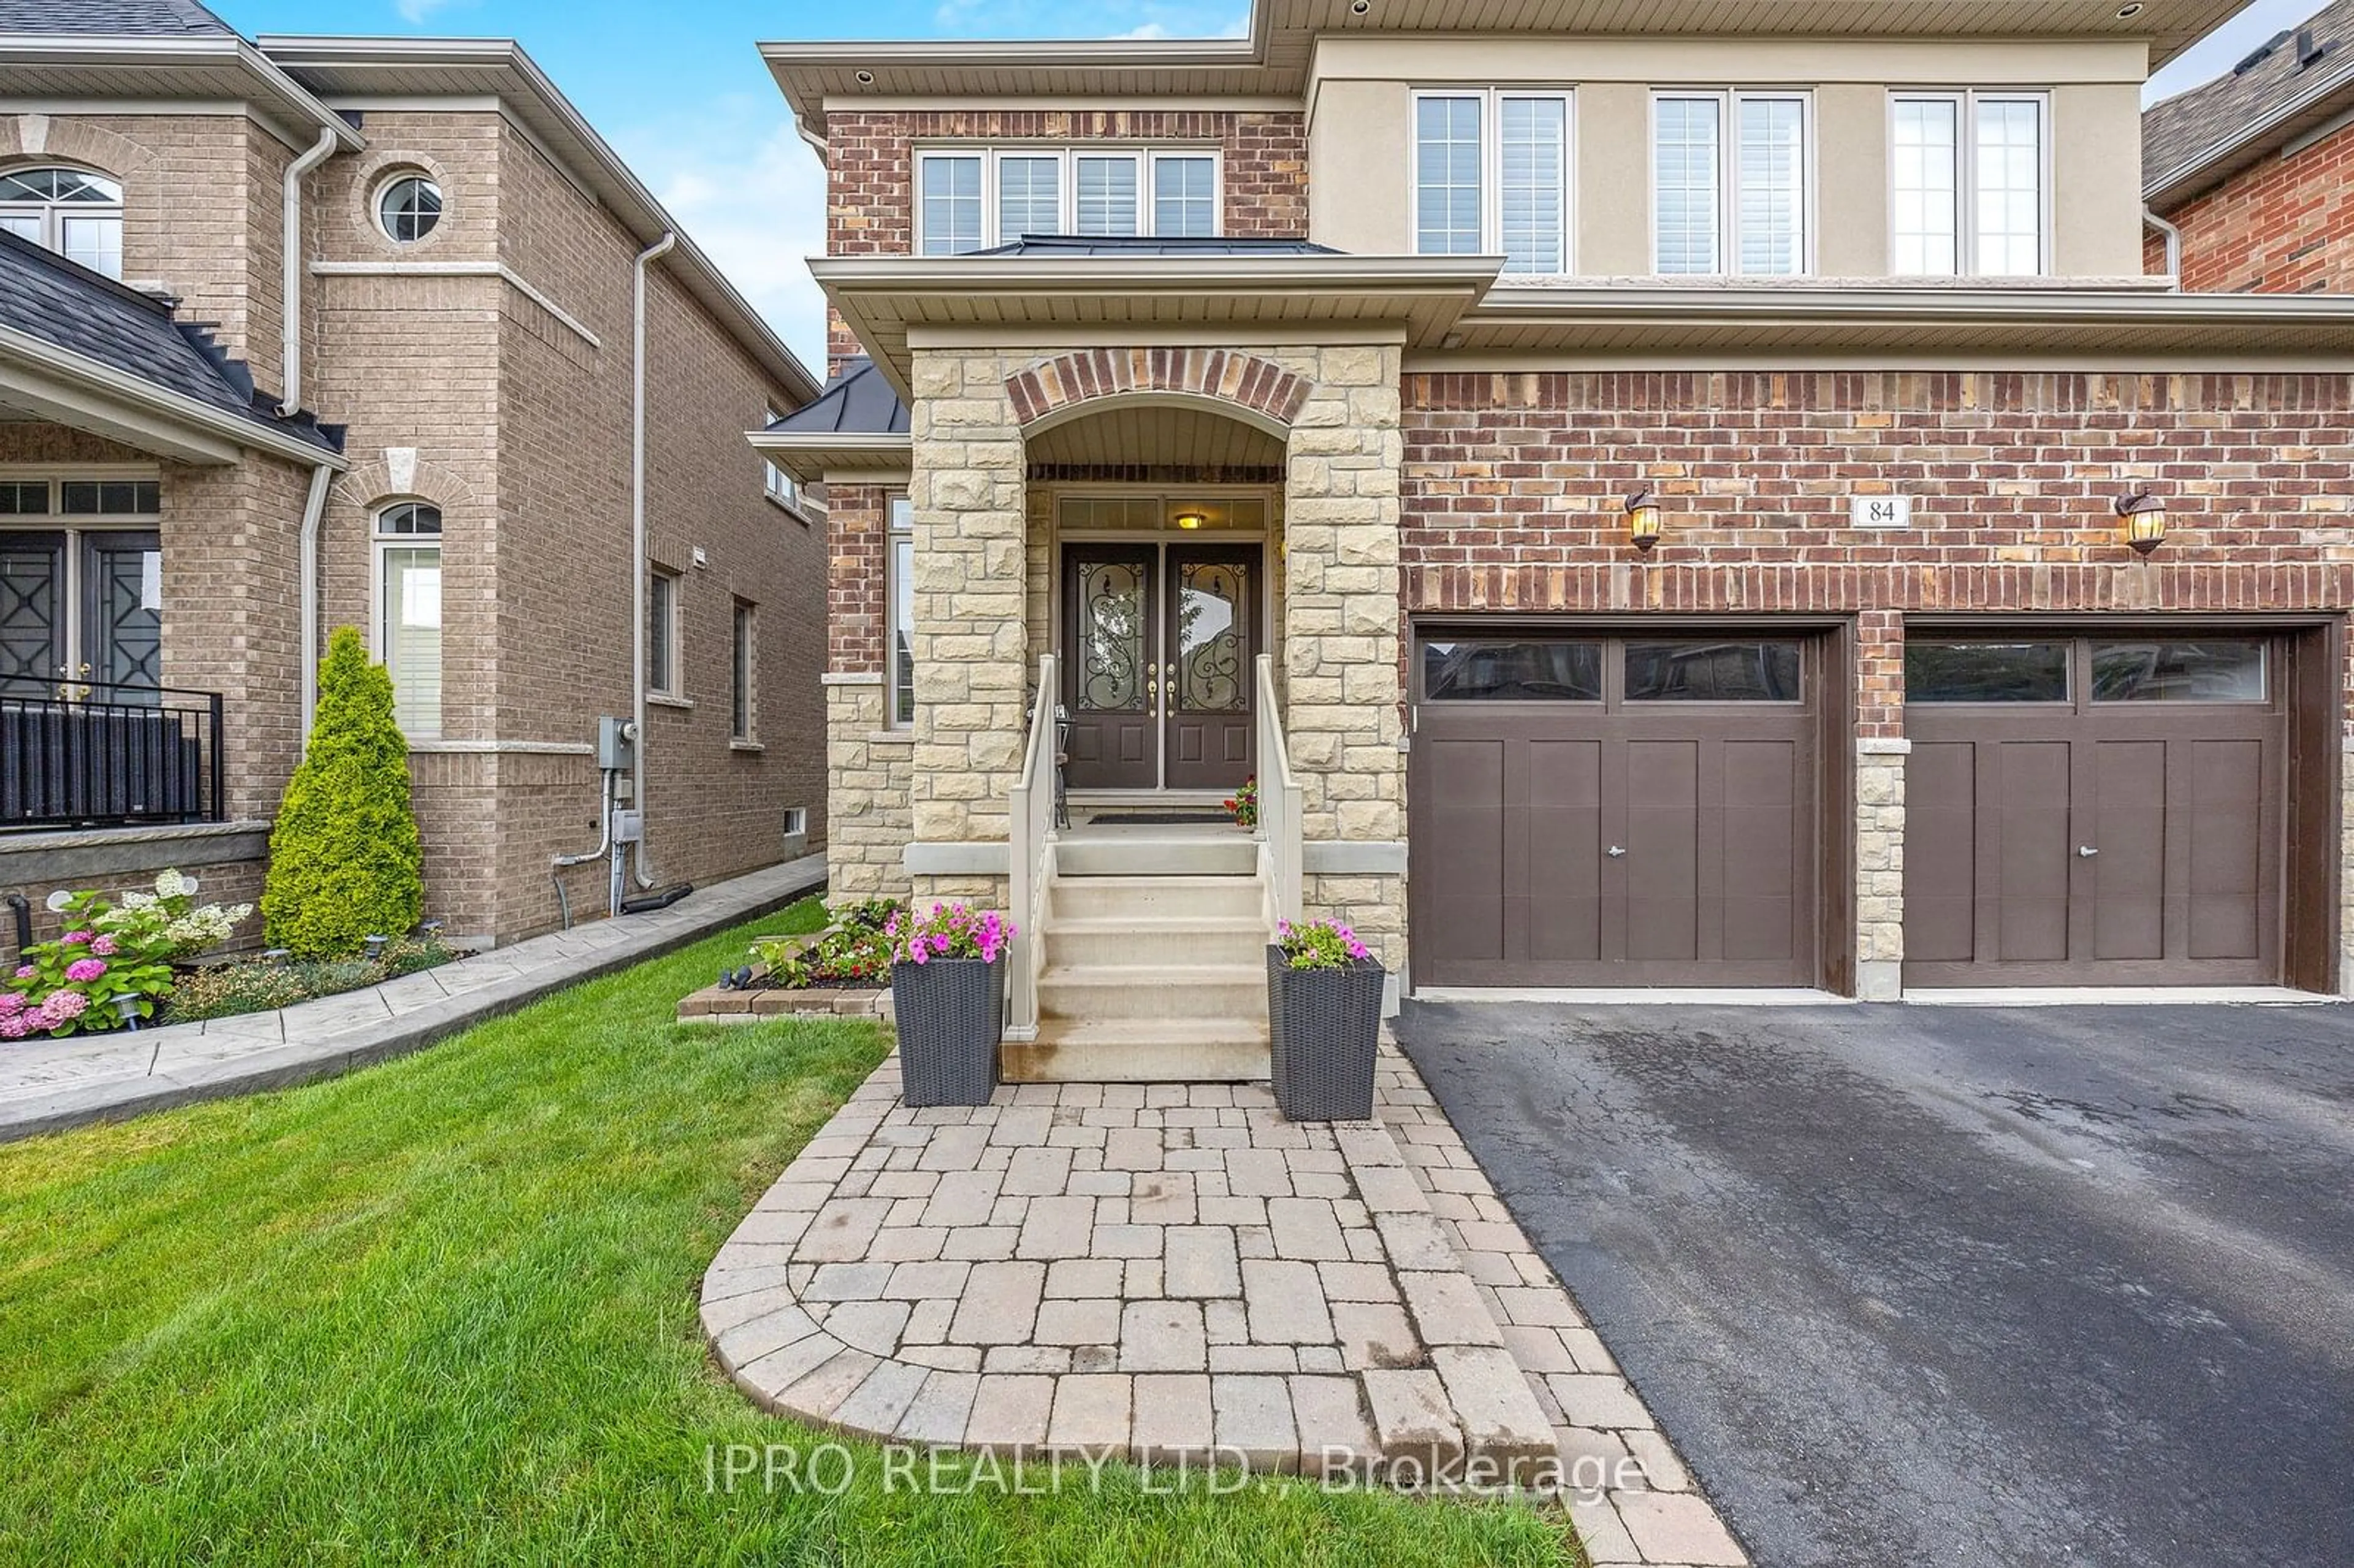 Home with brick exterior material for 84 Northwest Crt, Halton Hills Ontario L7G 0K7